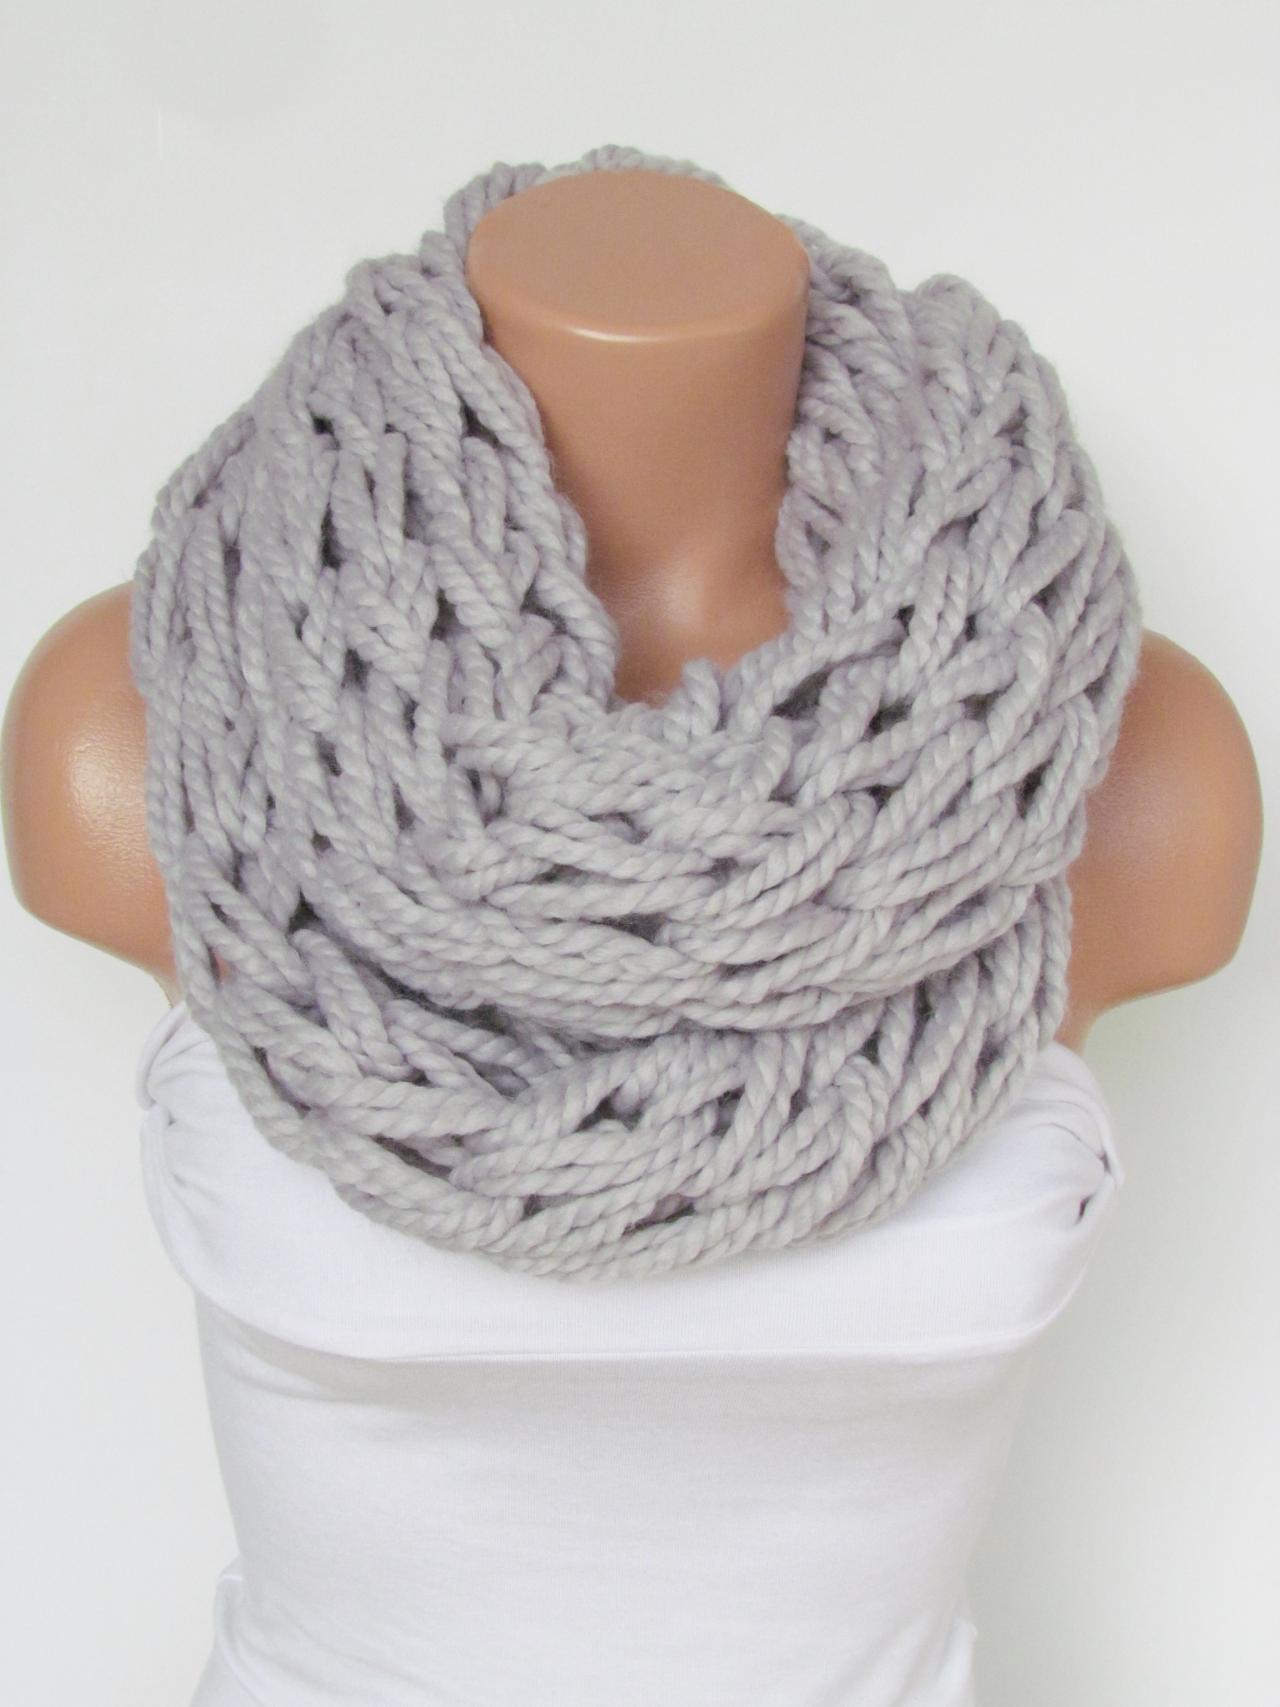 Infinity Silver Gray Scarf,Neckwarmer,Knitted Scarf,Circle Loop Scarf, Winter Accessories, Fall Fashion,Chunky Scarf.Cowl Scarf